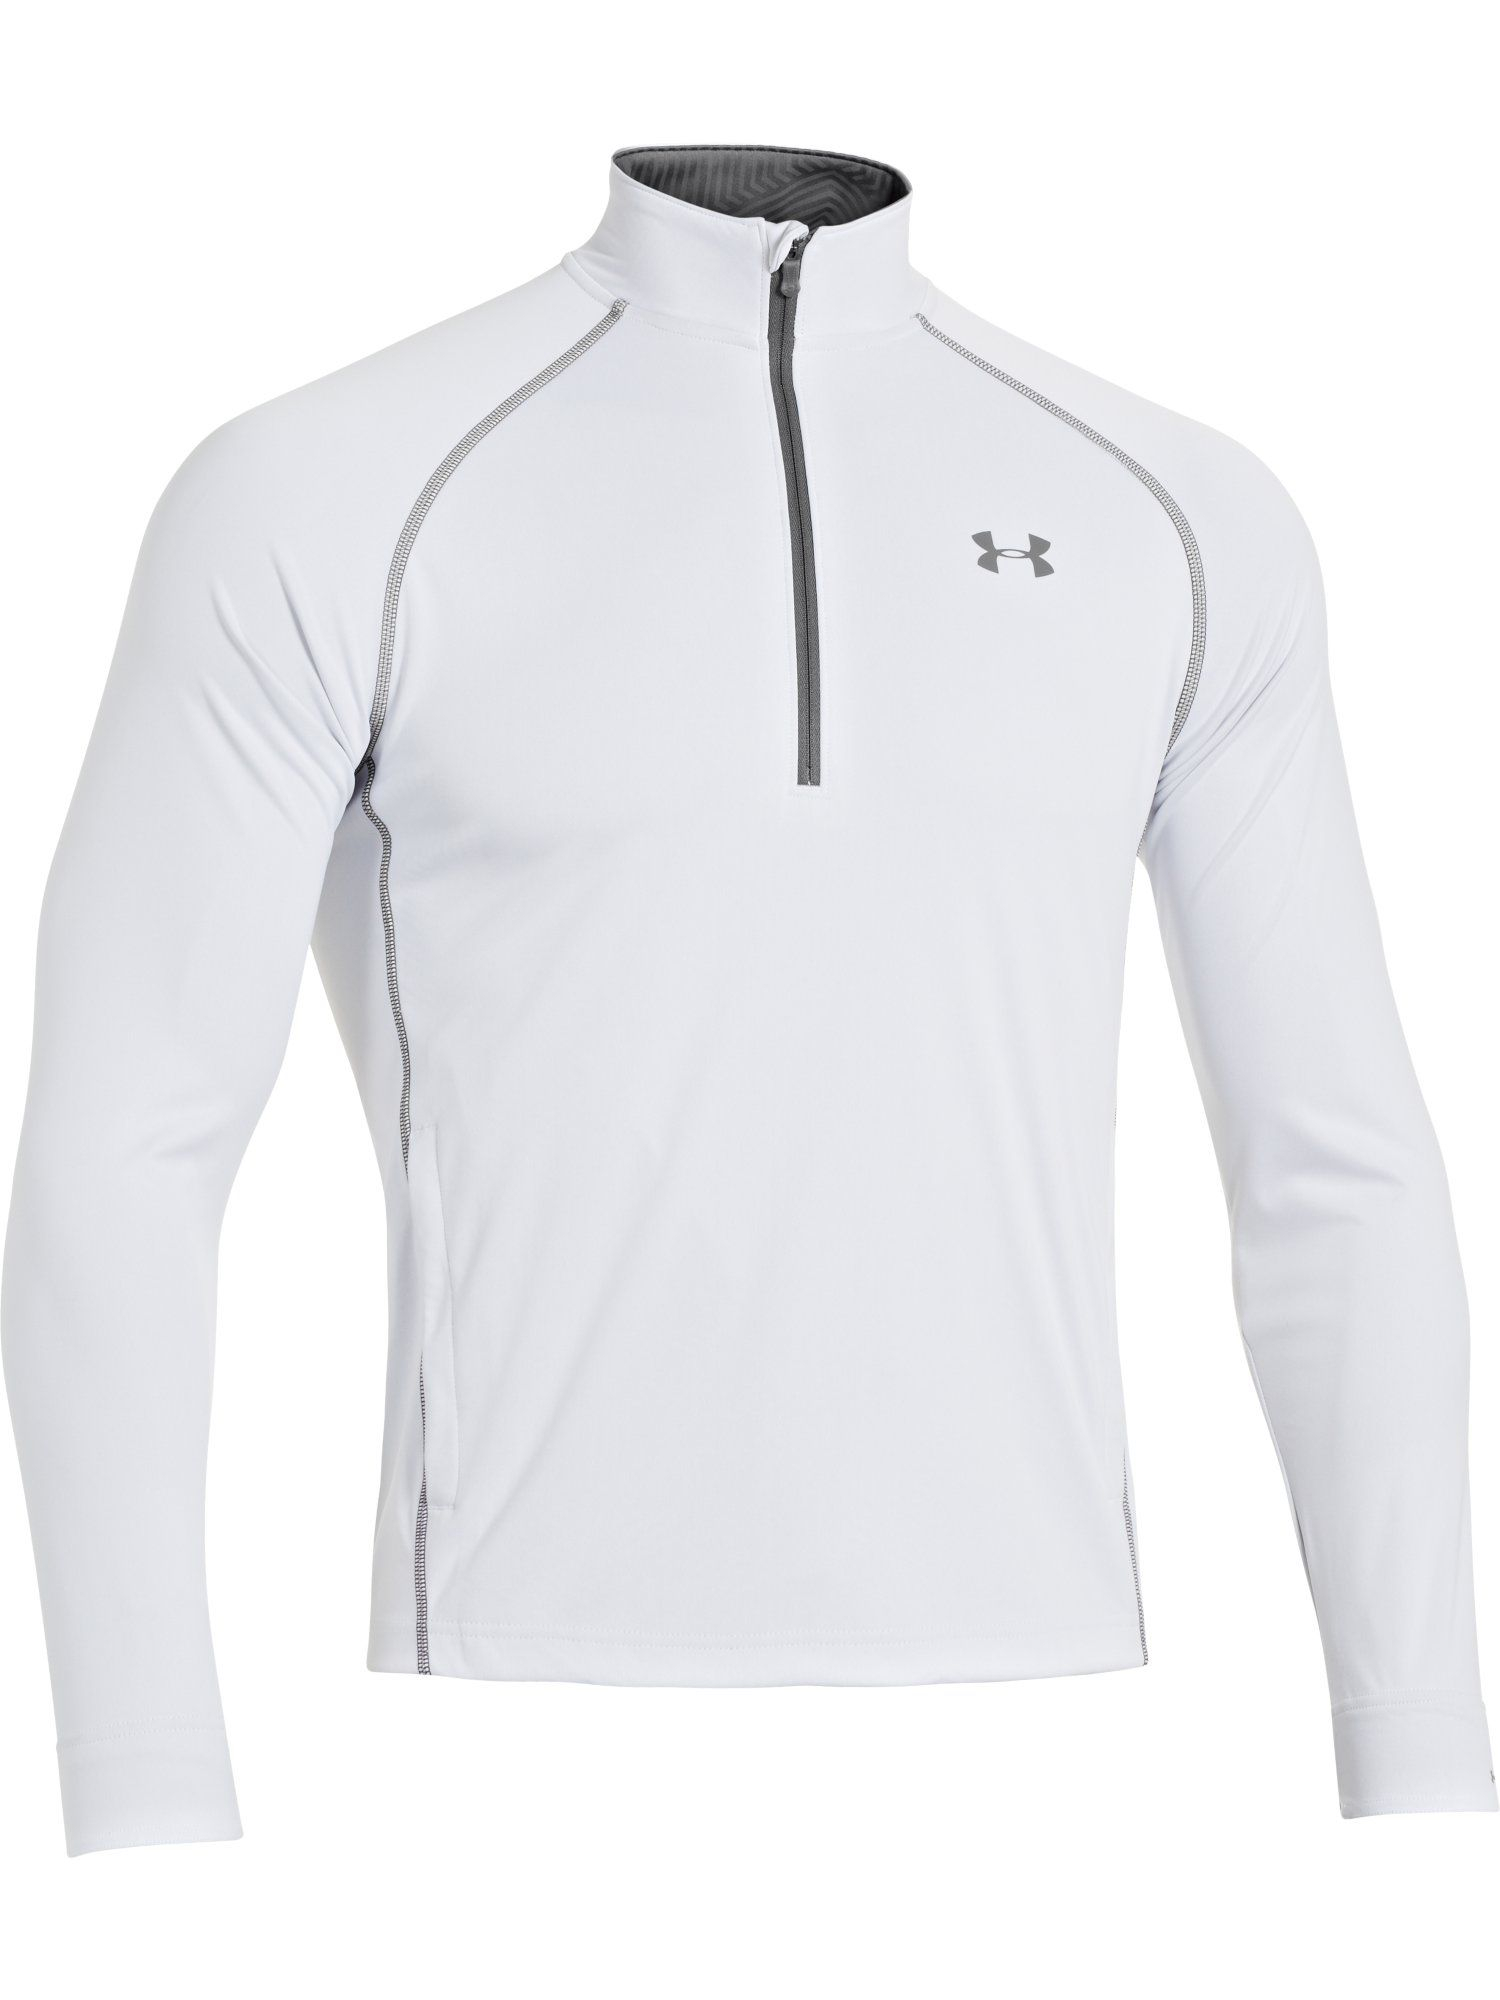 Under armour Elements Coldgear Infrared Zip Jacket in White for Men | Lyst